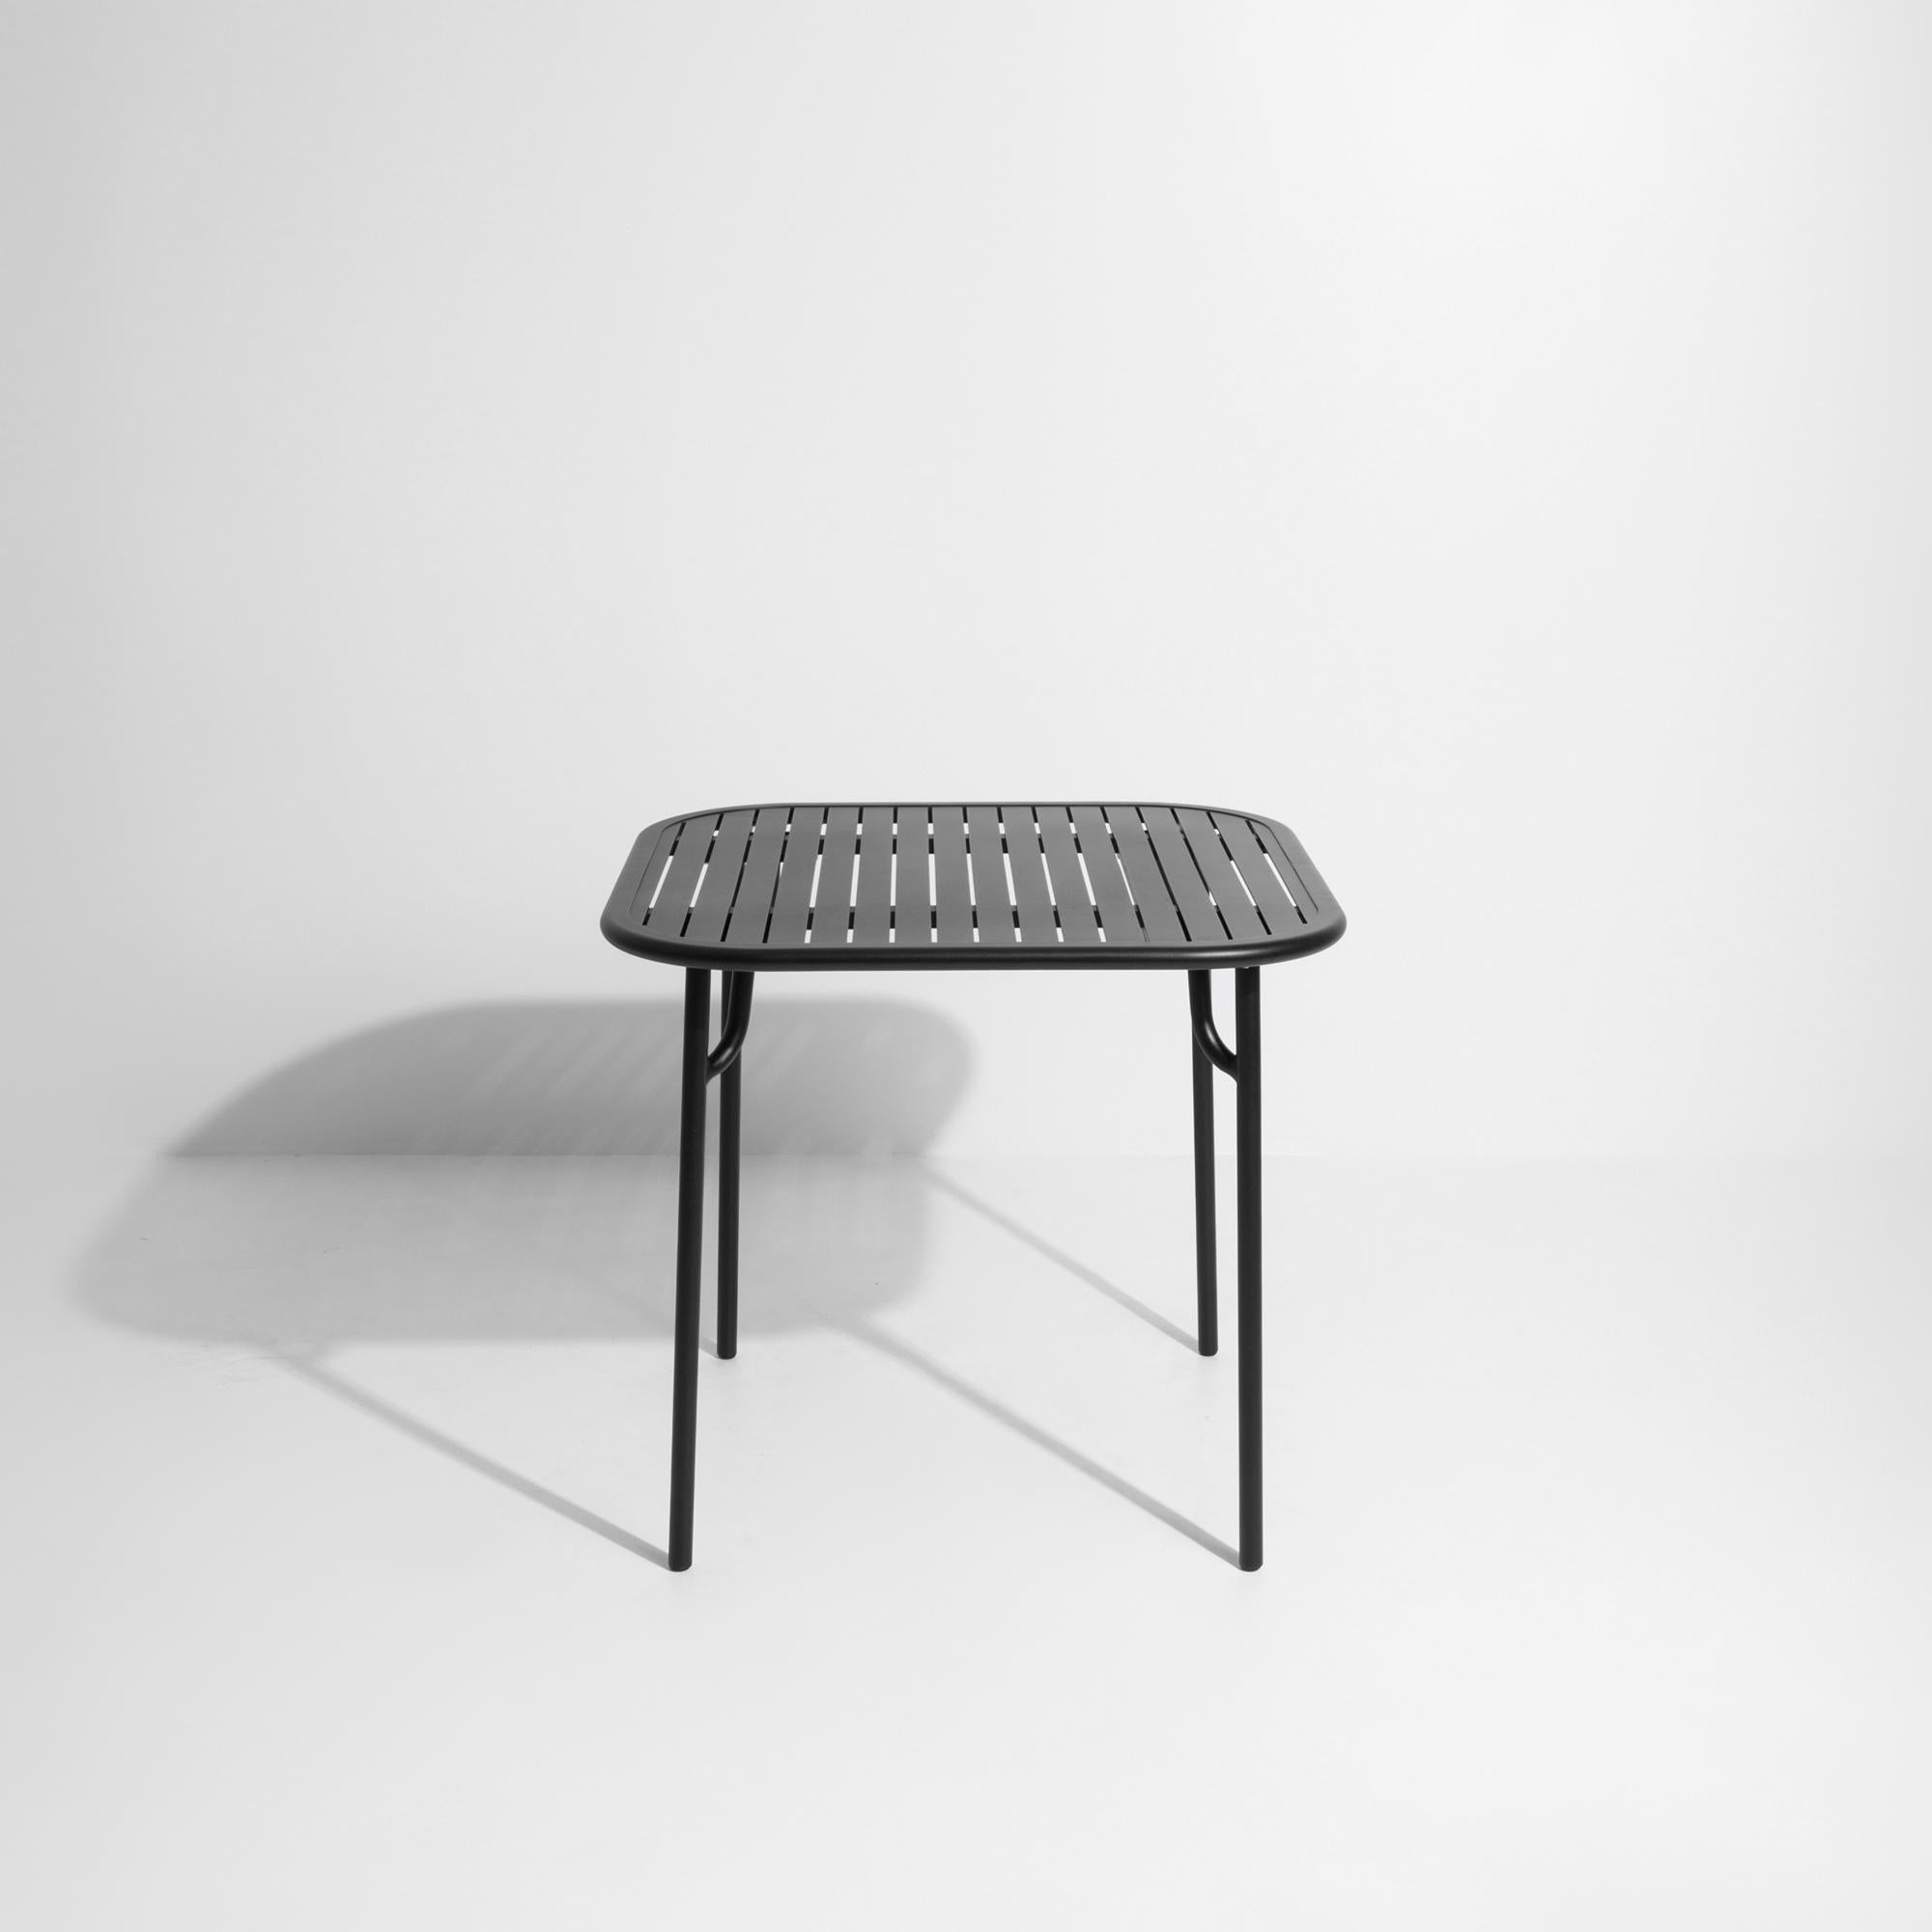 Chinese Petite Friture Week-End Square Dining Table in Black Aluminium with Slats For Sale